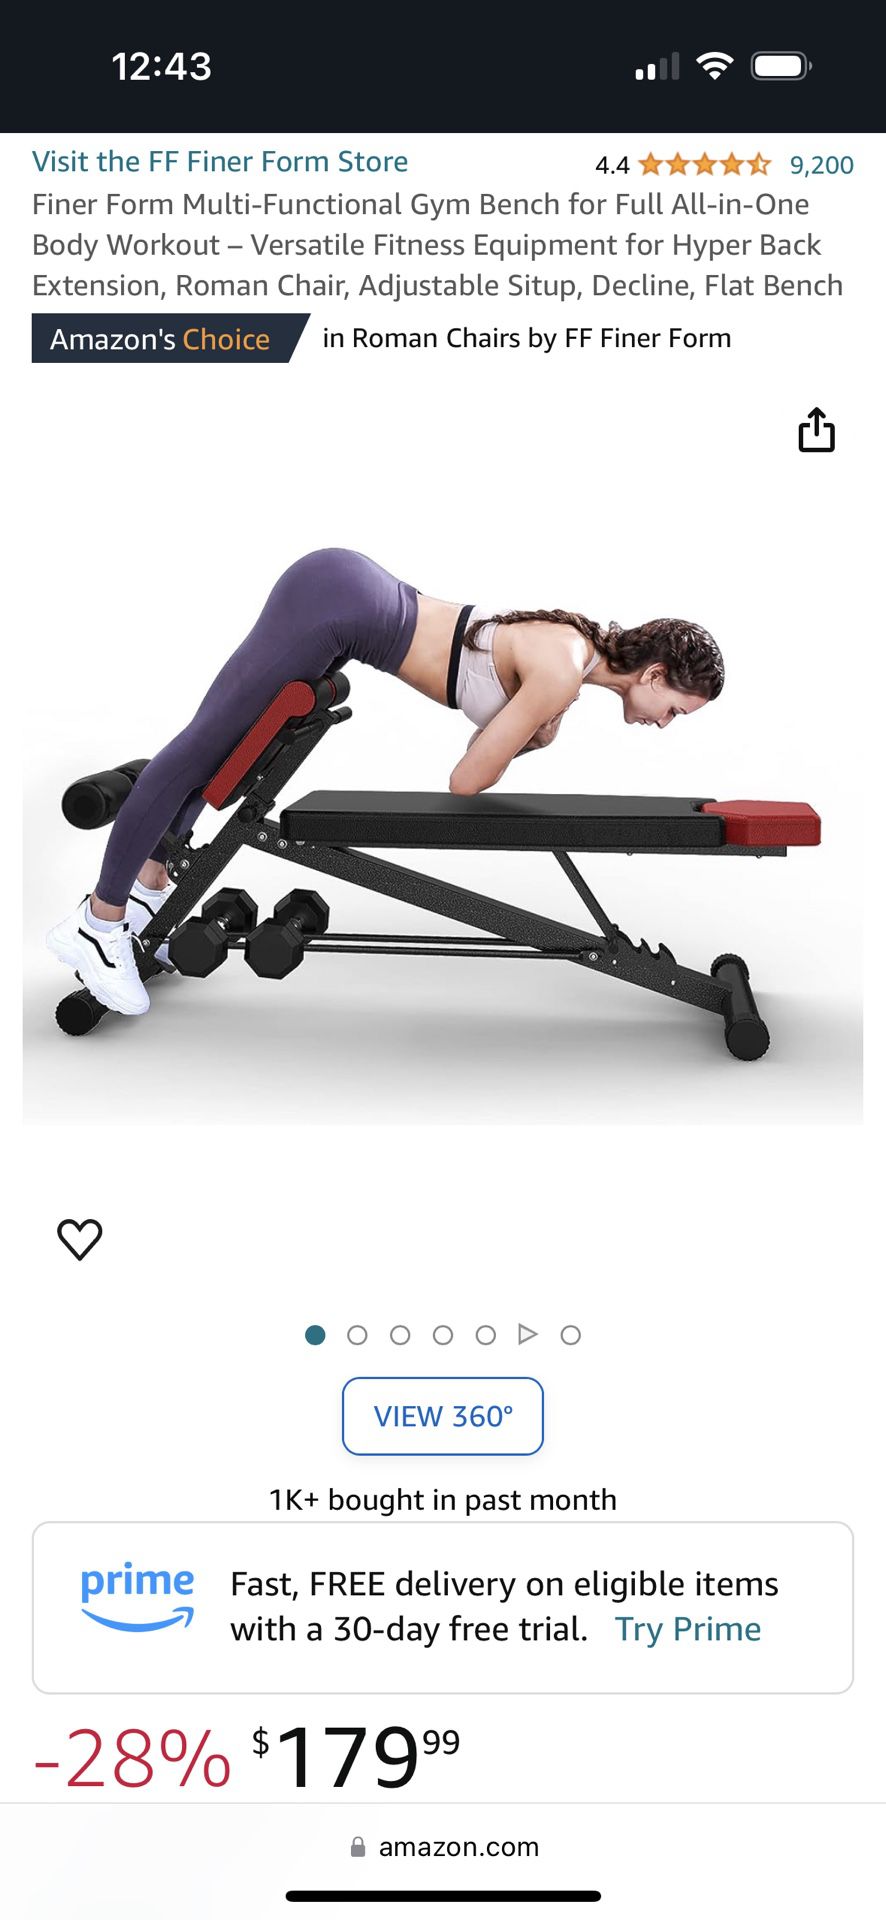 Finer Form Multi-Functional Gym Bench for Full All-in-One Body Workout - Versatile Fitness Equipment for Hyper Back Extension, Roman Chair, Adjustable